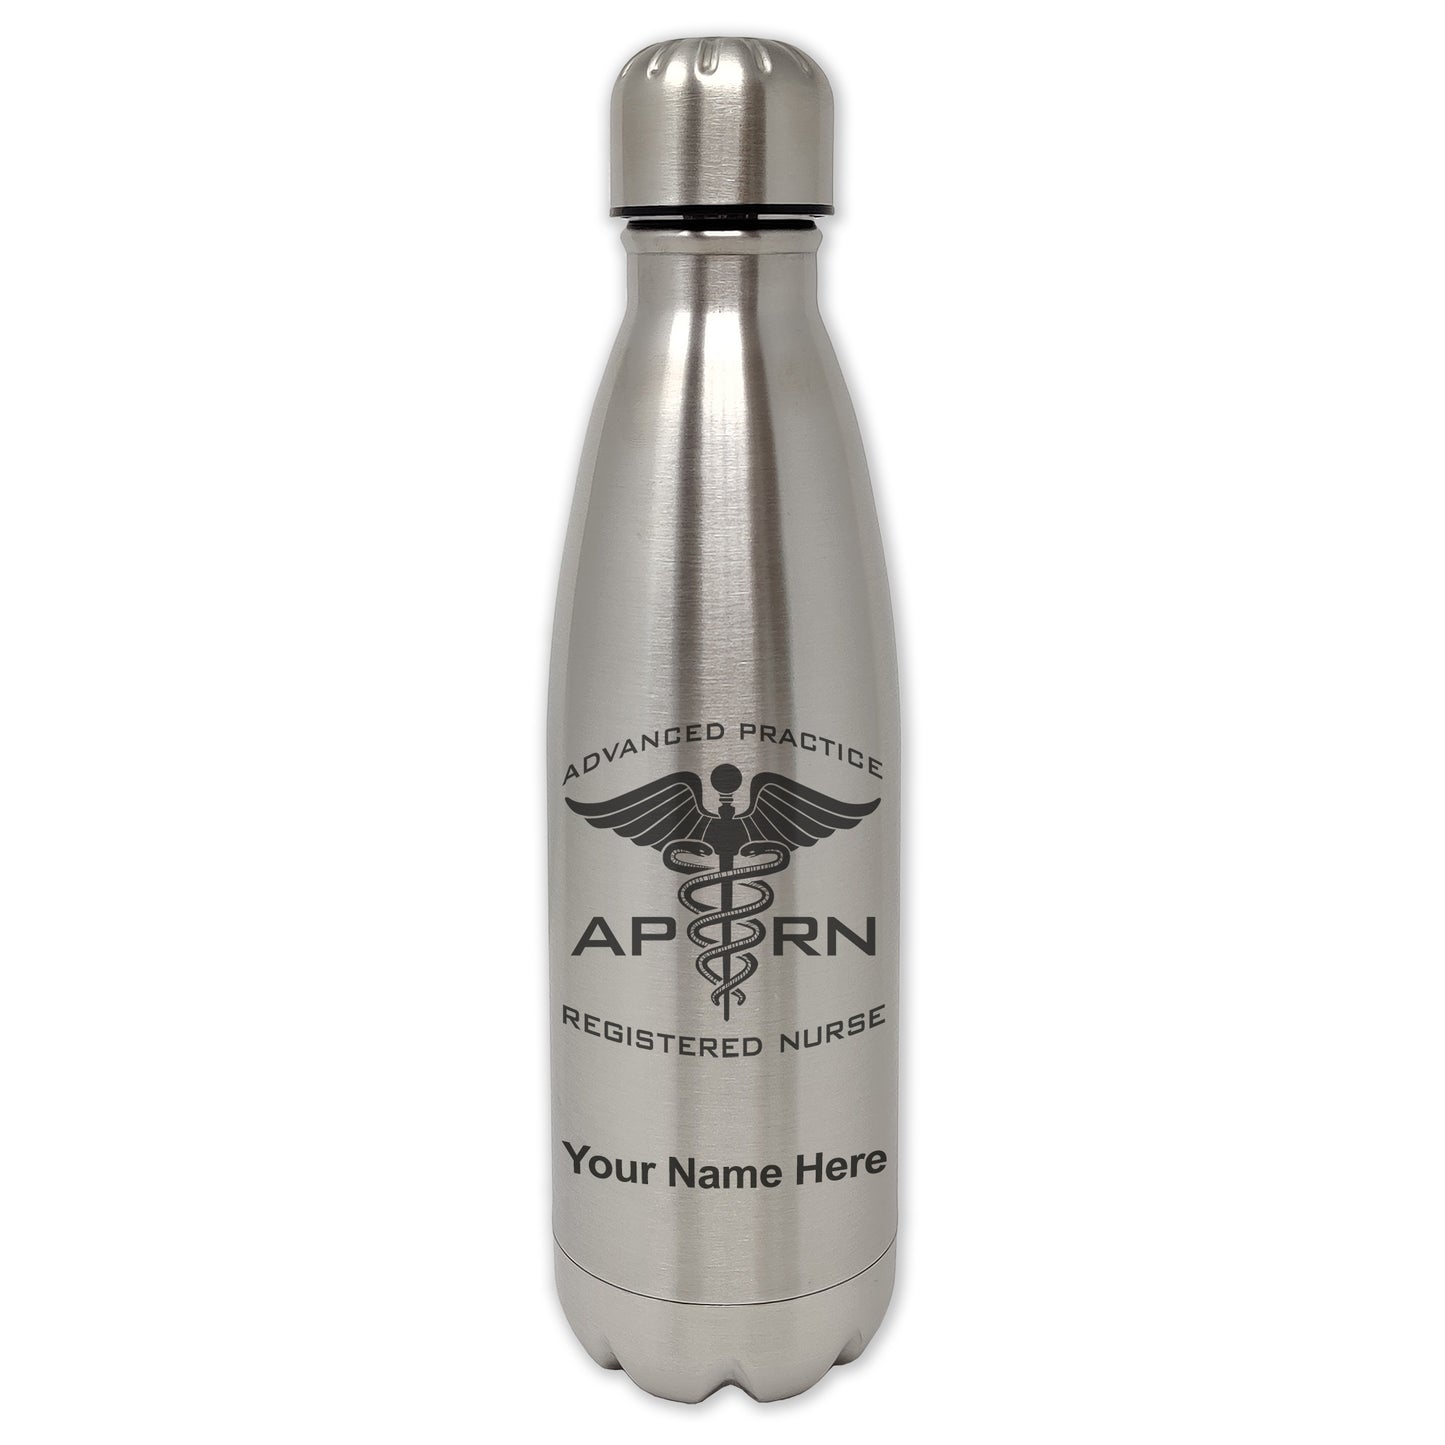 LaserGram Double Wall Water Bottle, APRN Advanced Practice Registered Nurse, Personalized Engraving Included